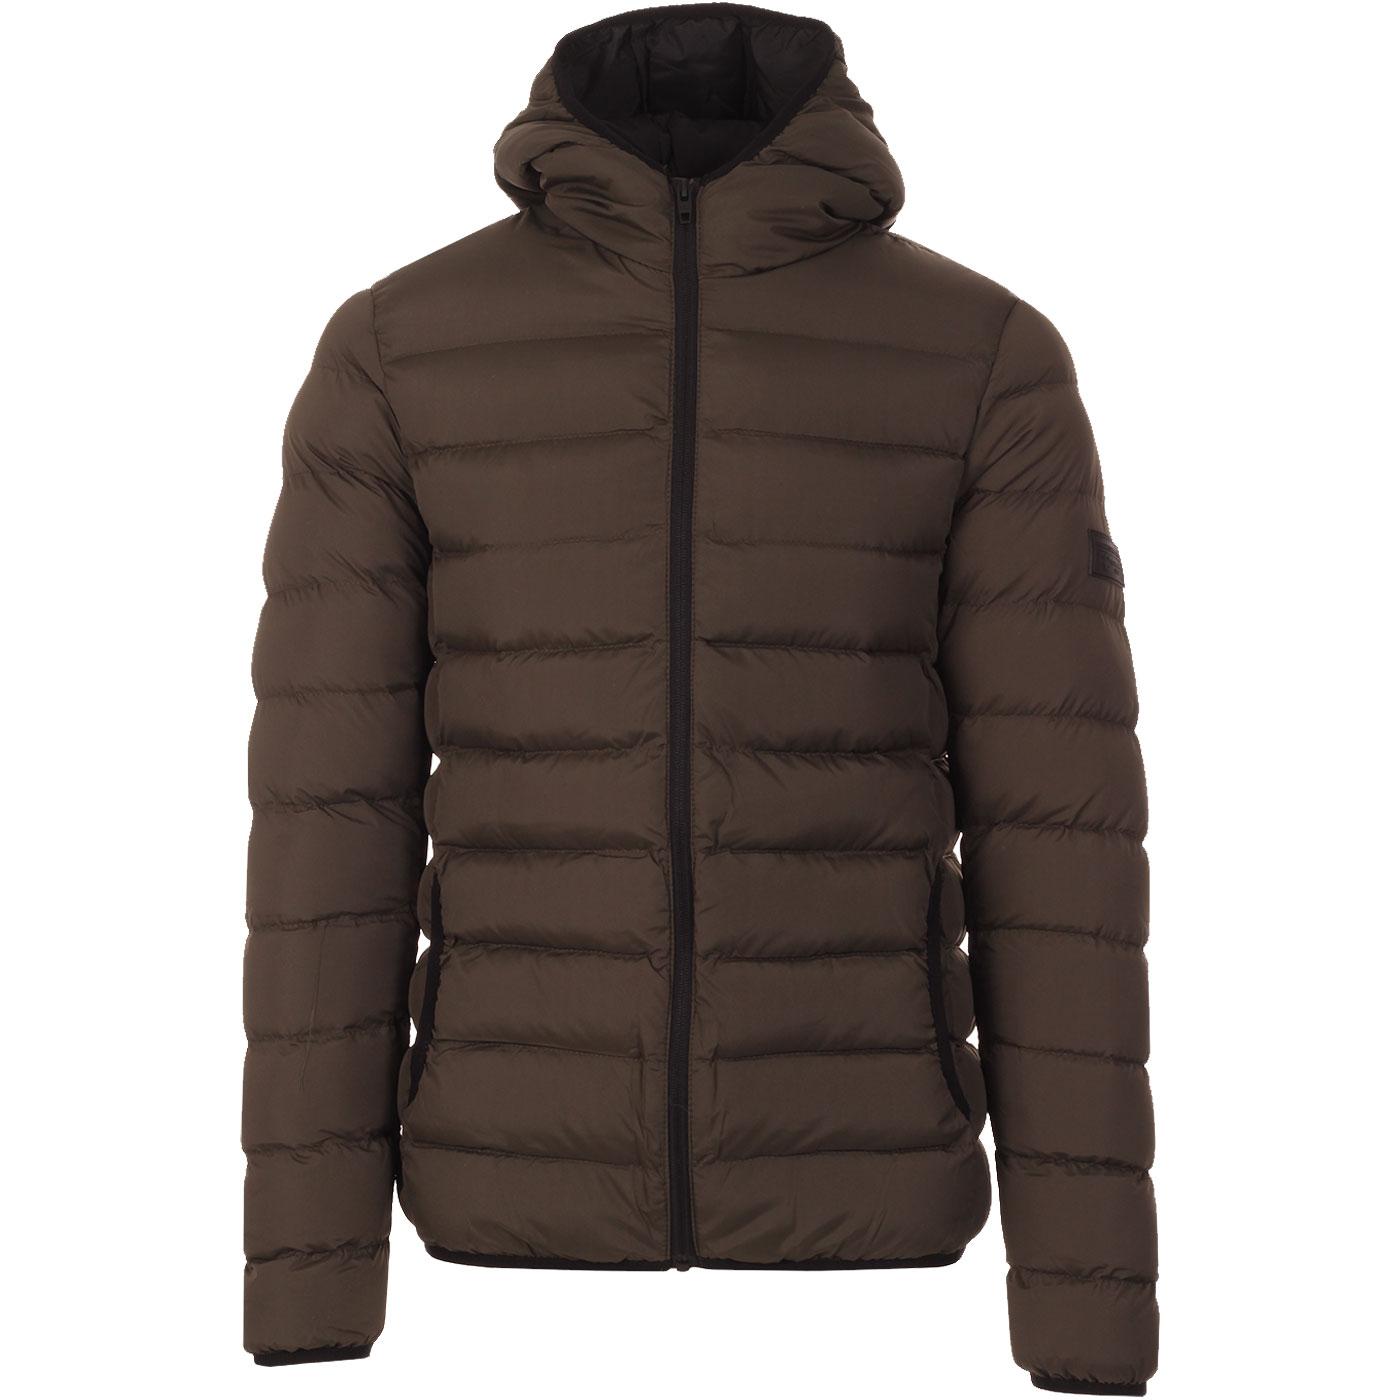 FRENCH CONNECTION Men's Hooded Padded Jacket K 